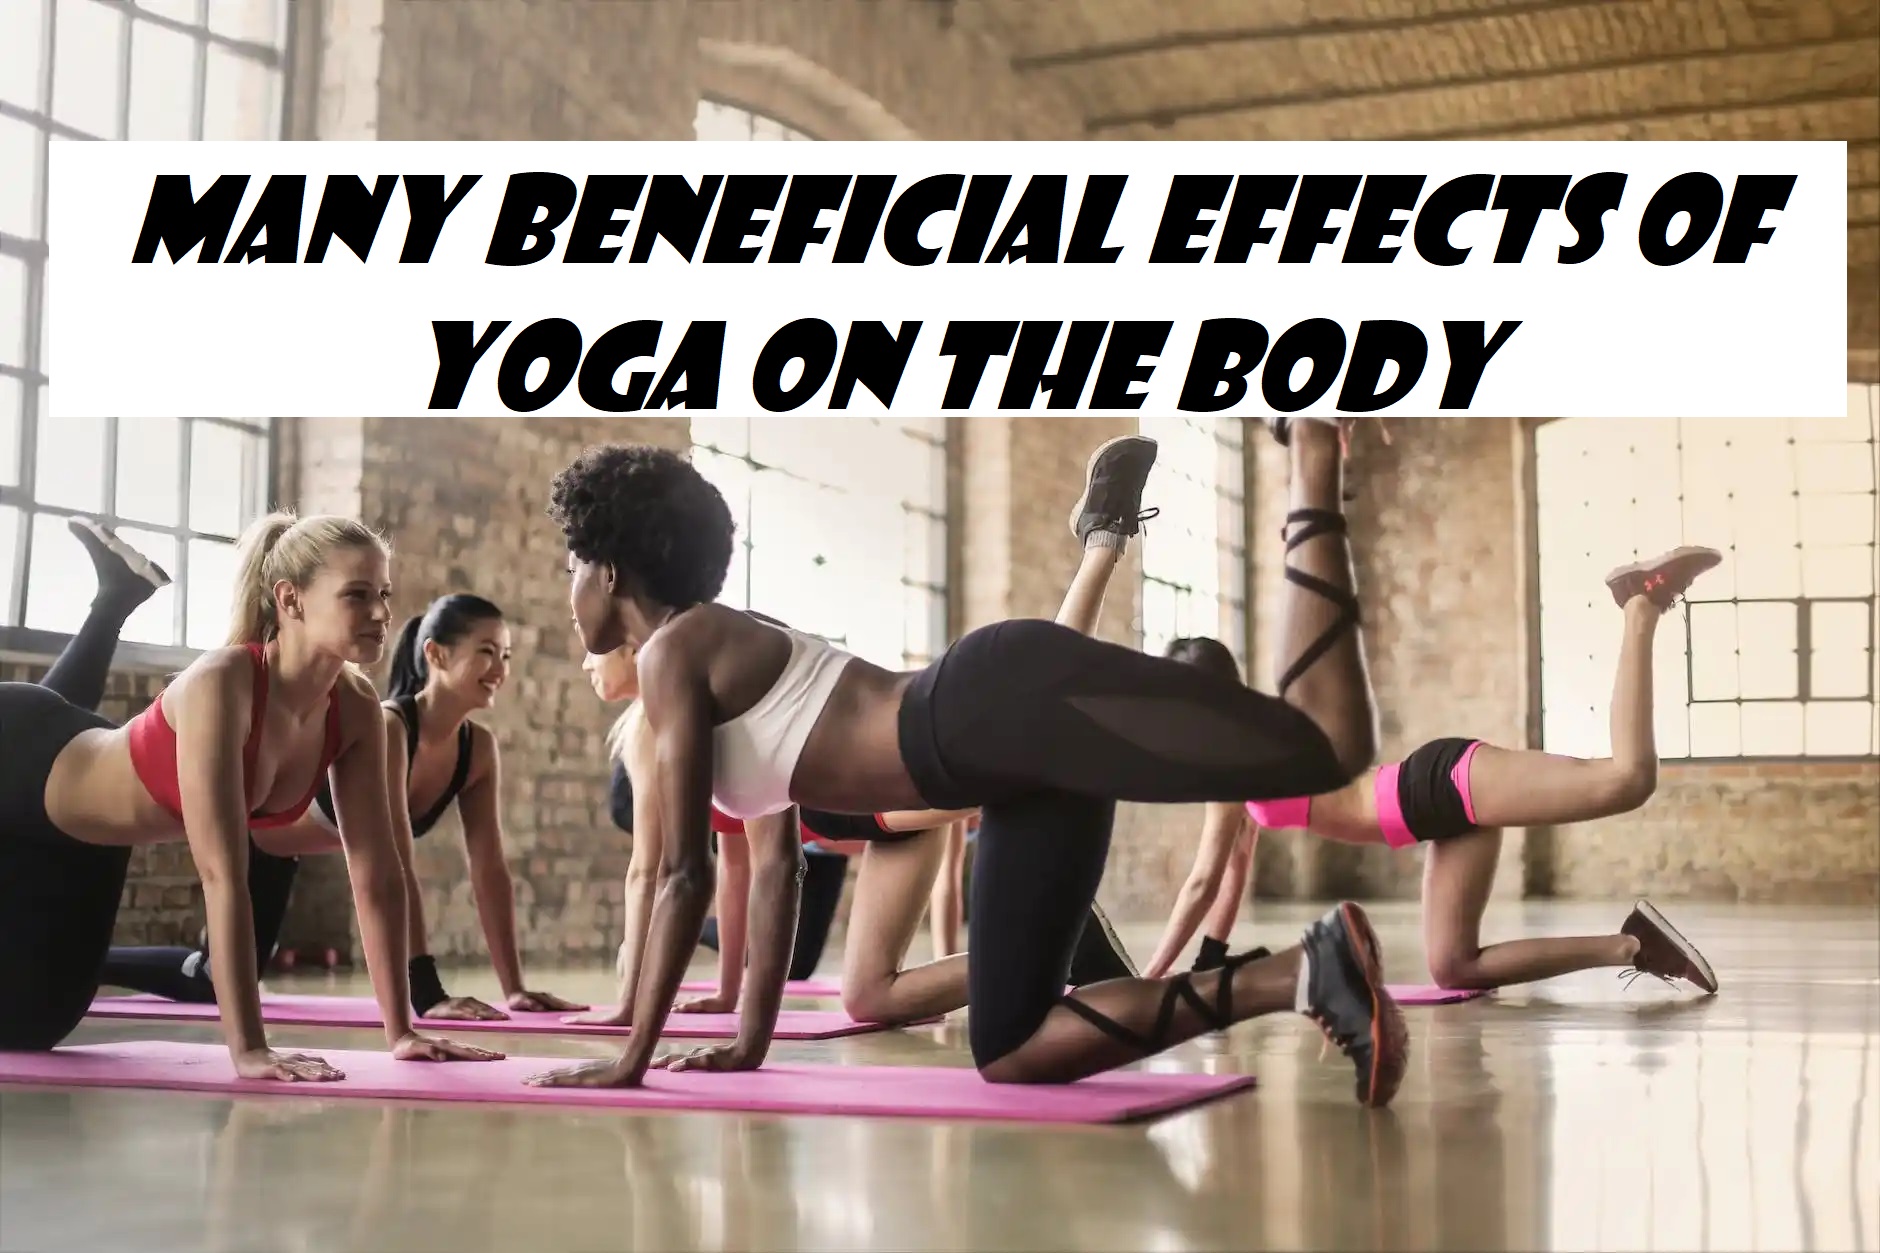 Many beneficial effects of Yoga on the body